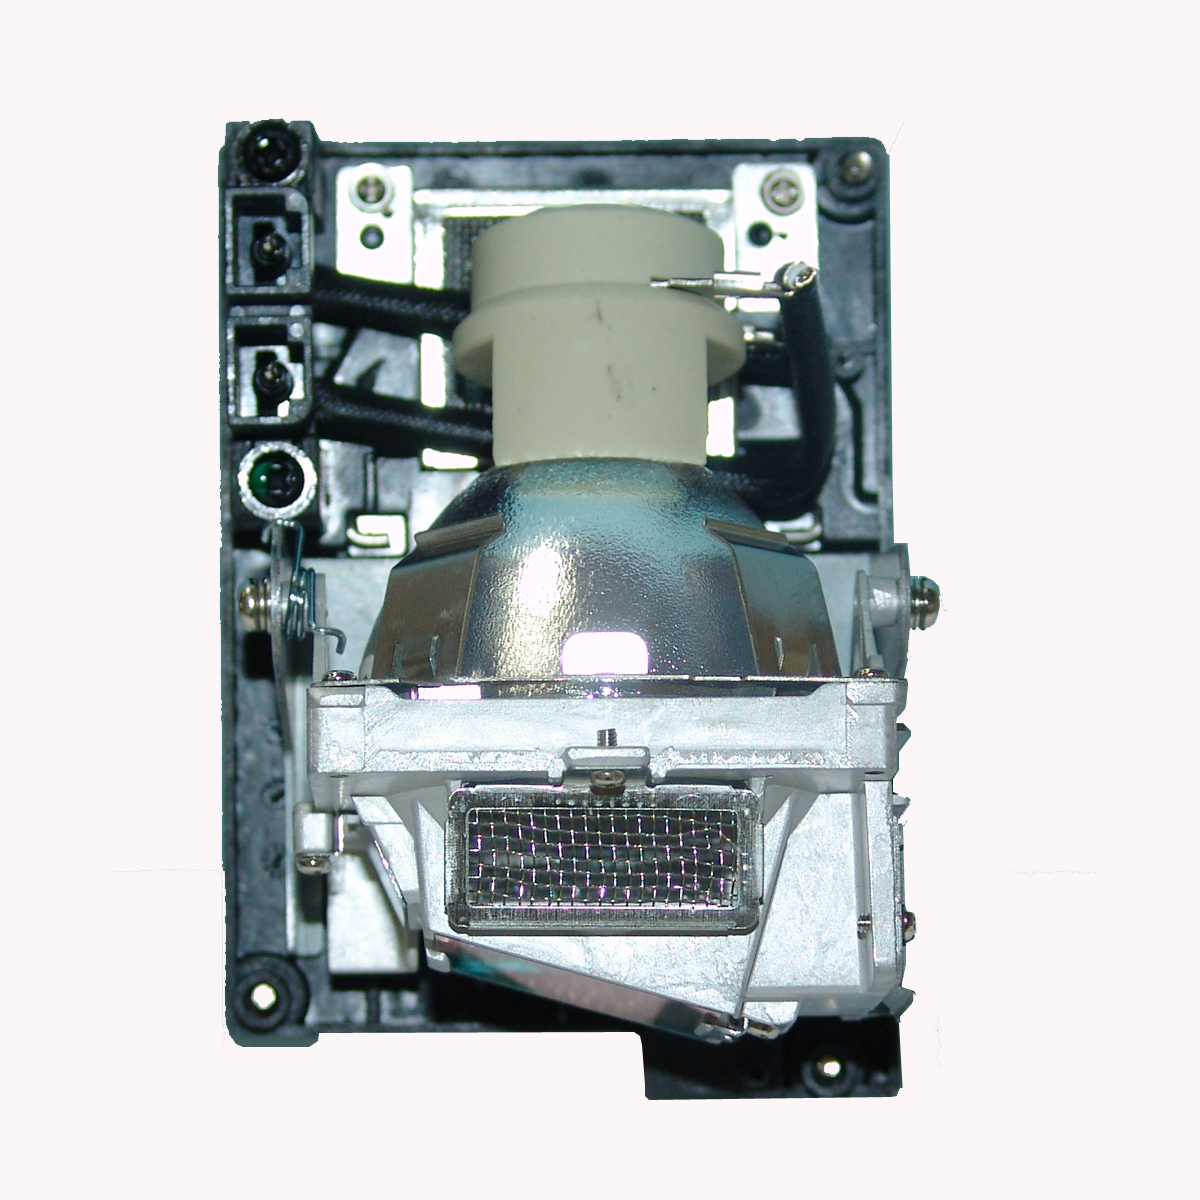 Buyquest PRM35AV1  OEM Replacement Projector Lamp for Promethean. Includes New Osram P-VIP 220W Bulb and Housing